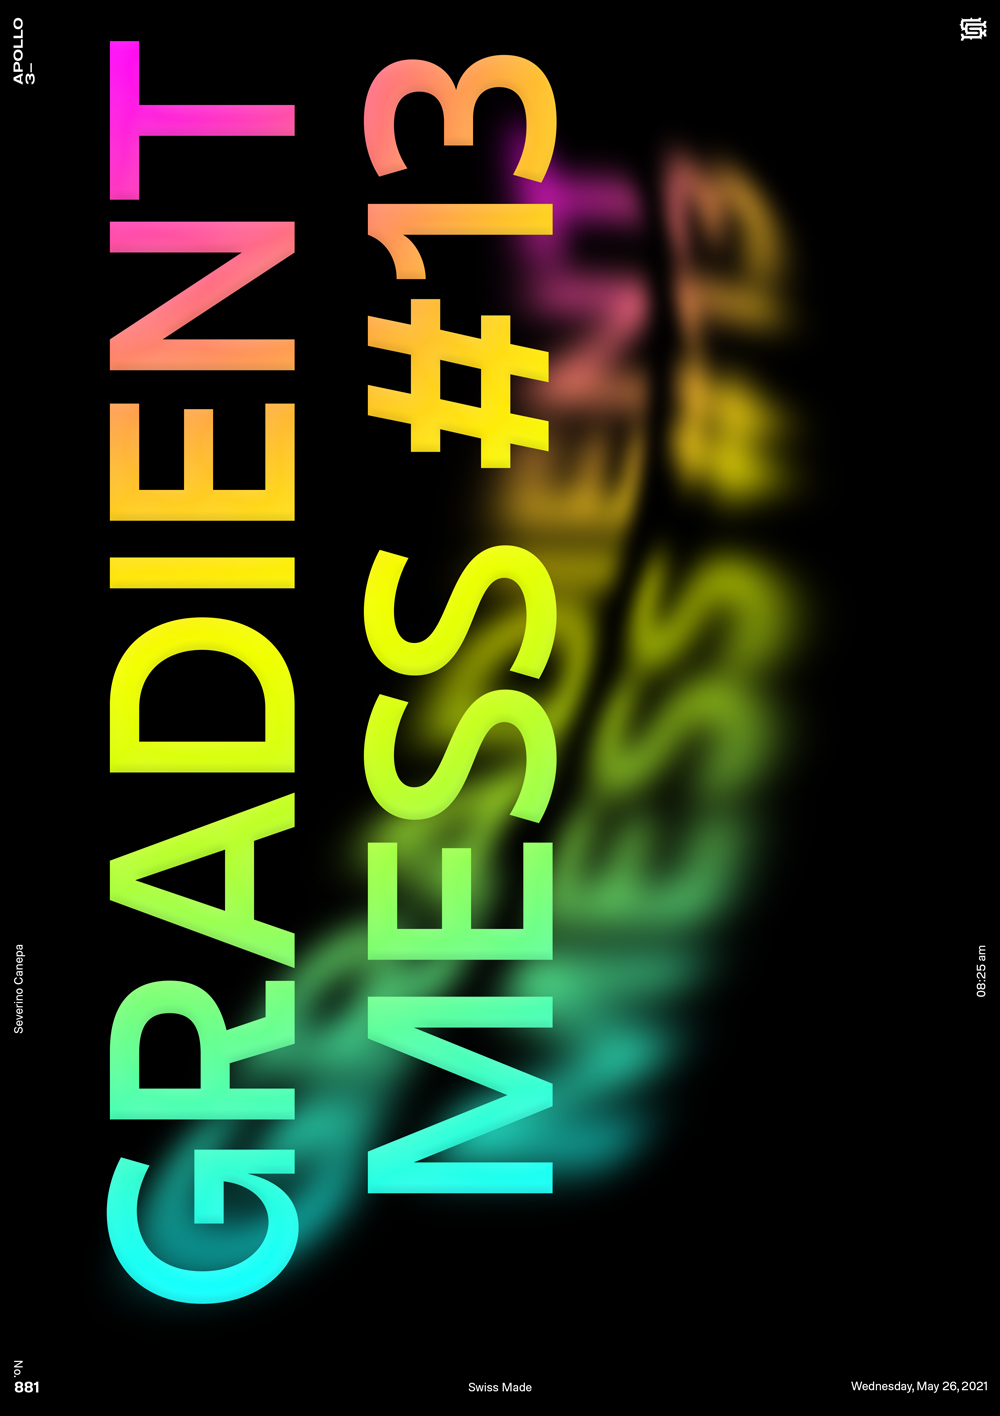 Minimalist and typographic digital creation realized with a colorful gradient